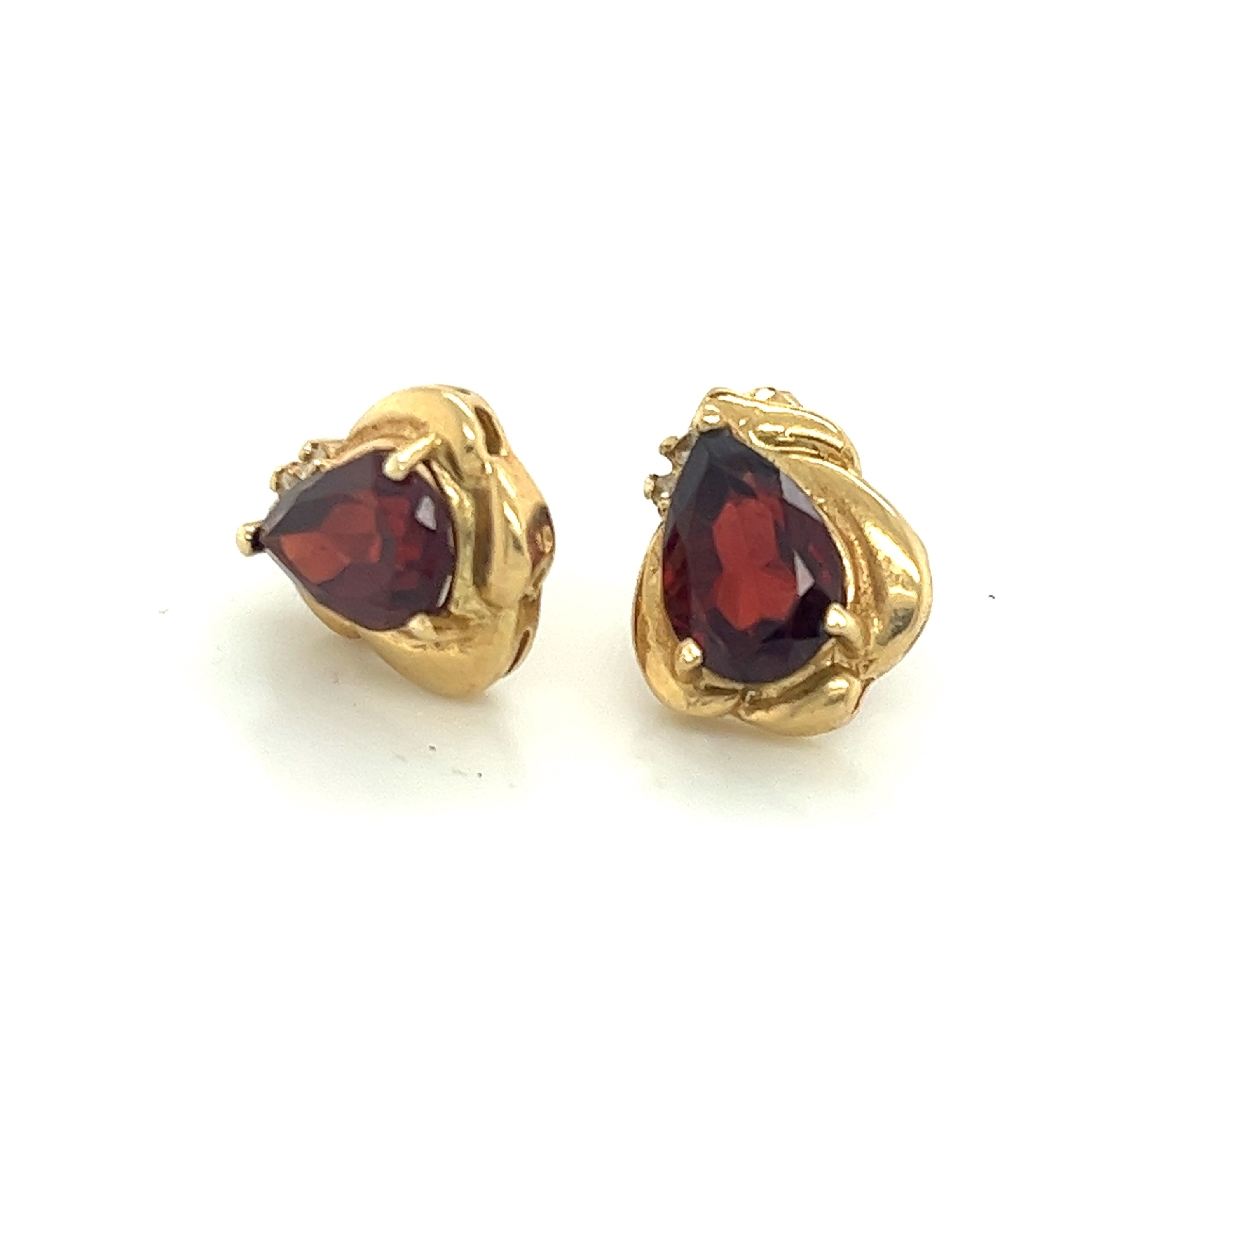 14 K Yellow Gold Pear Shaped Garnet Earings With Diamond Accents